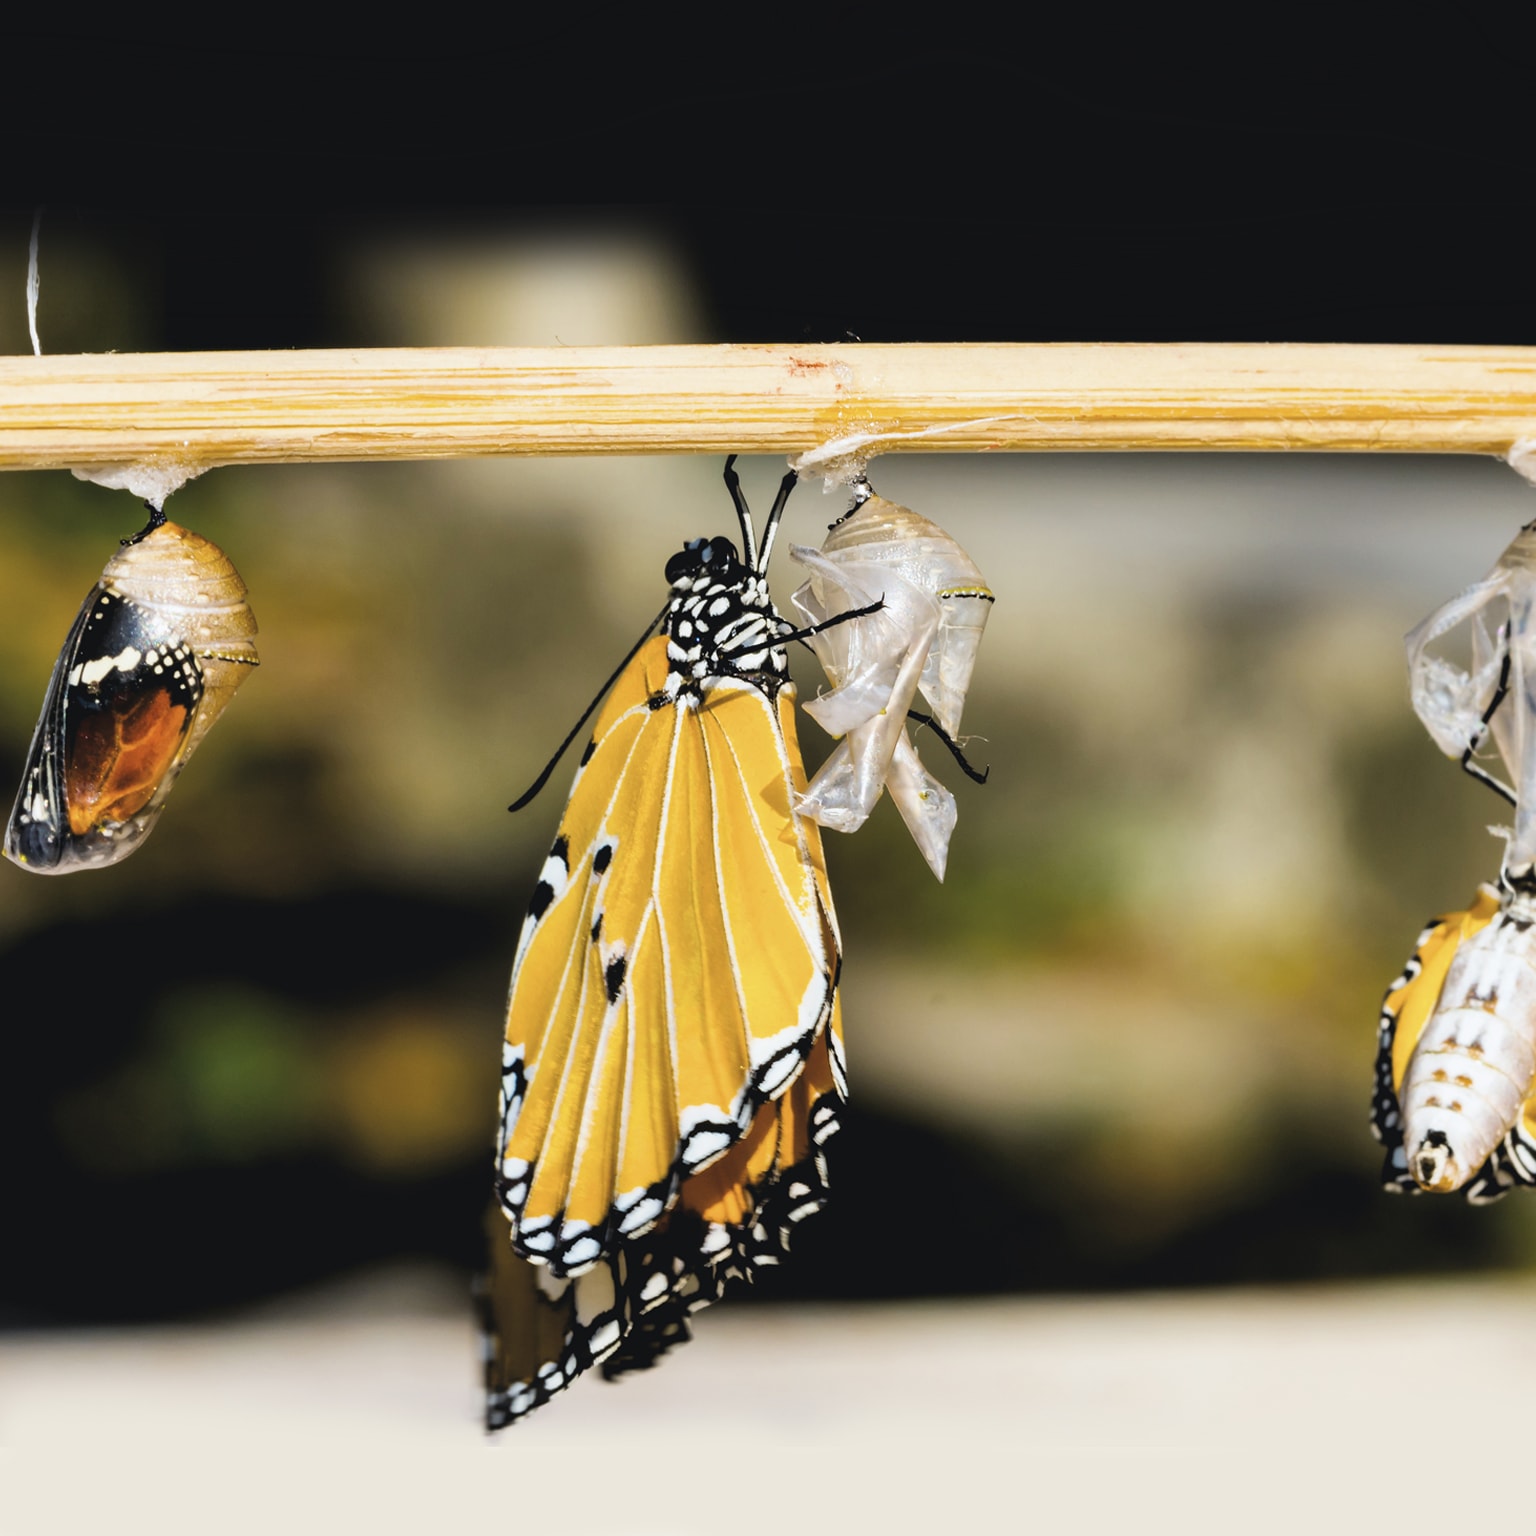 A butterfly emerges from its chrysalis stage.